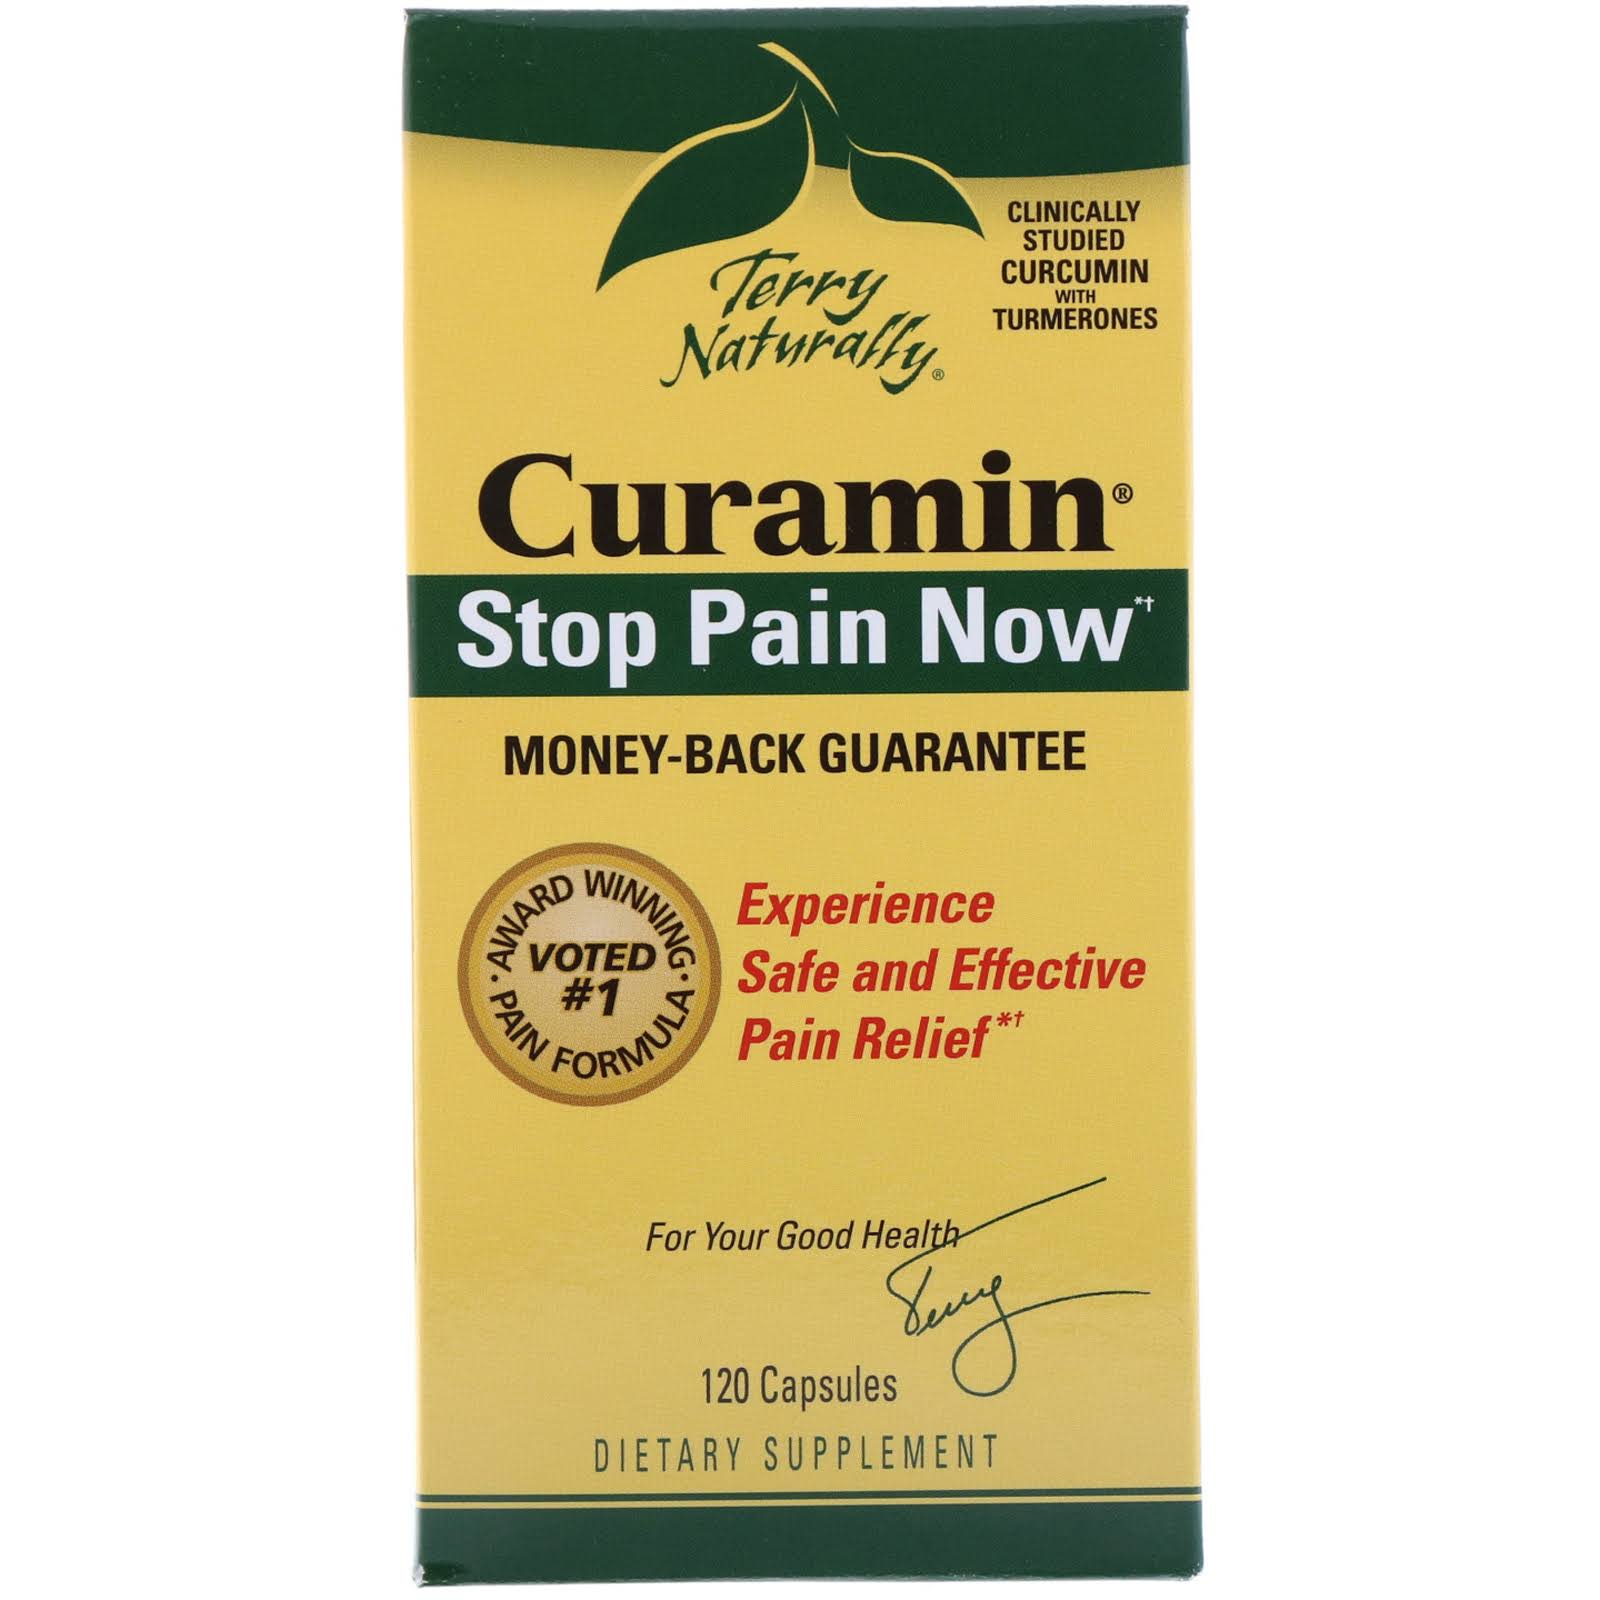 Terry Naturally Curamin Pain Relief - 120 Capsules